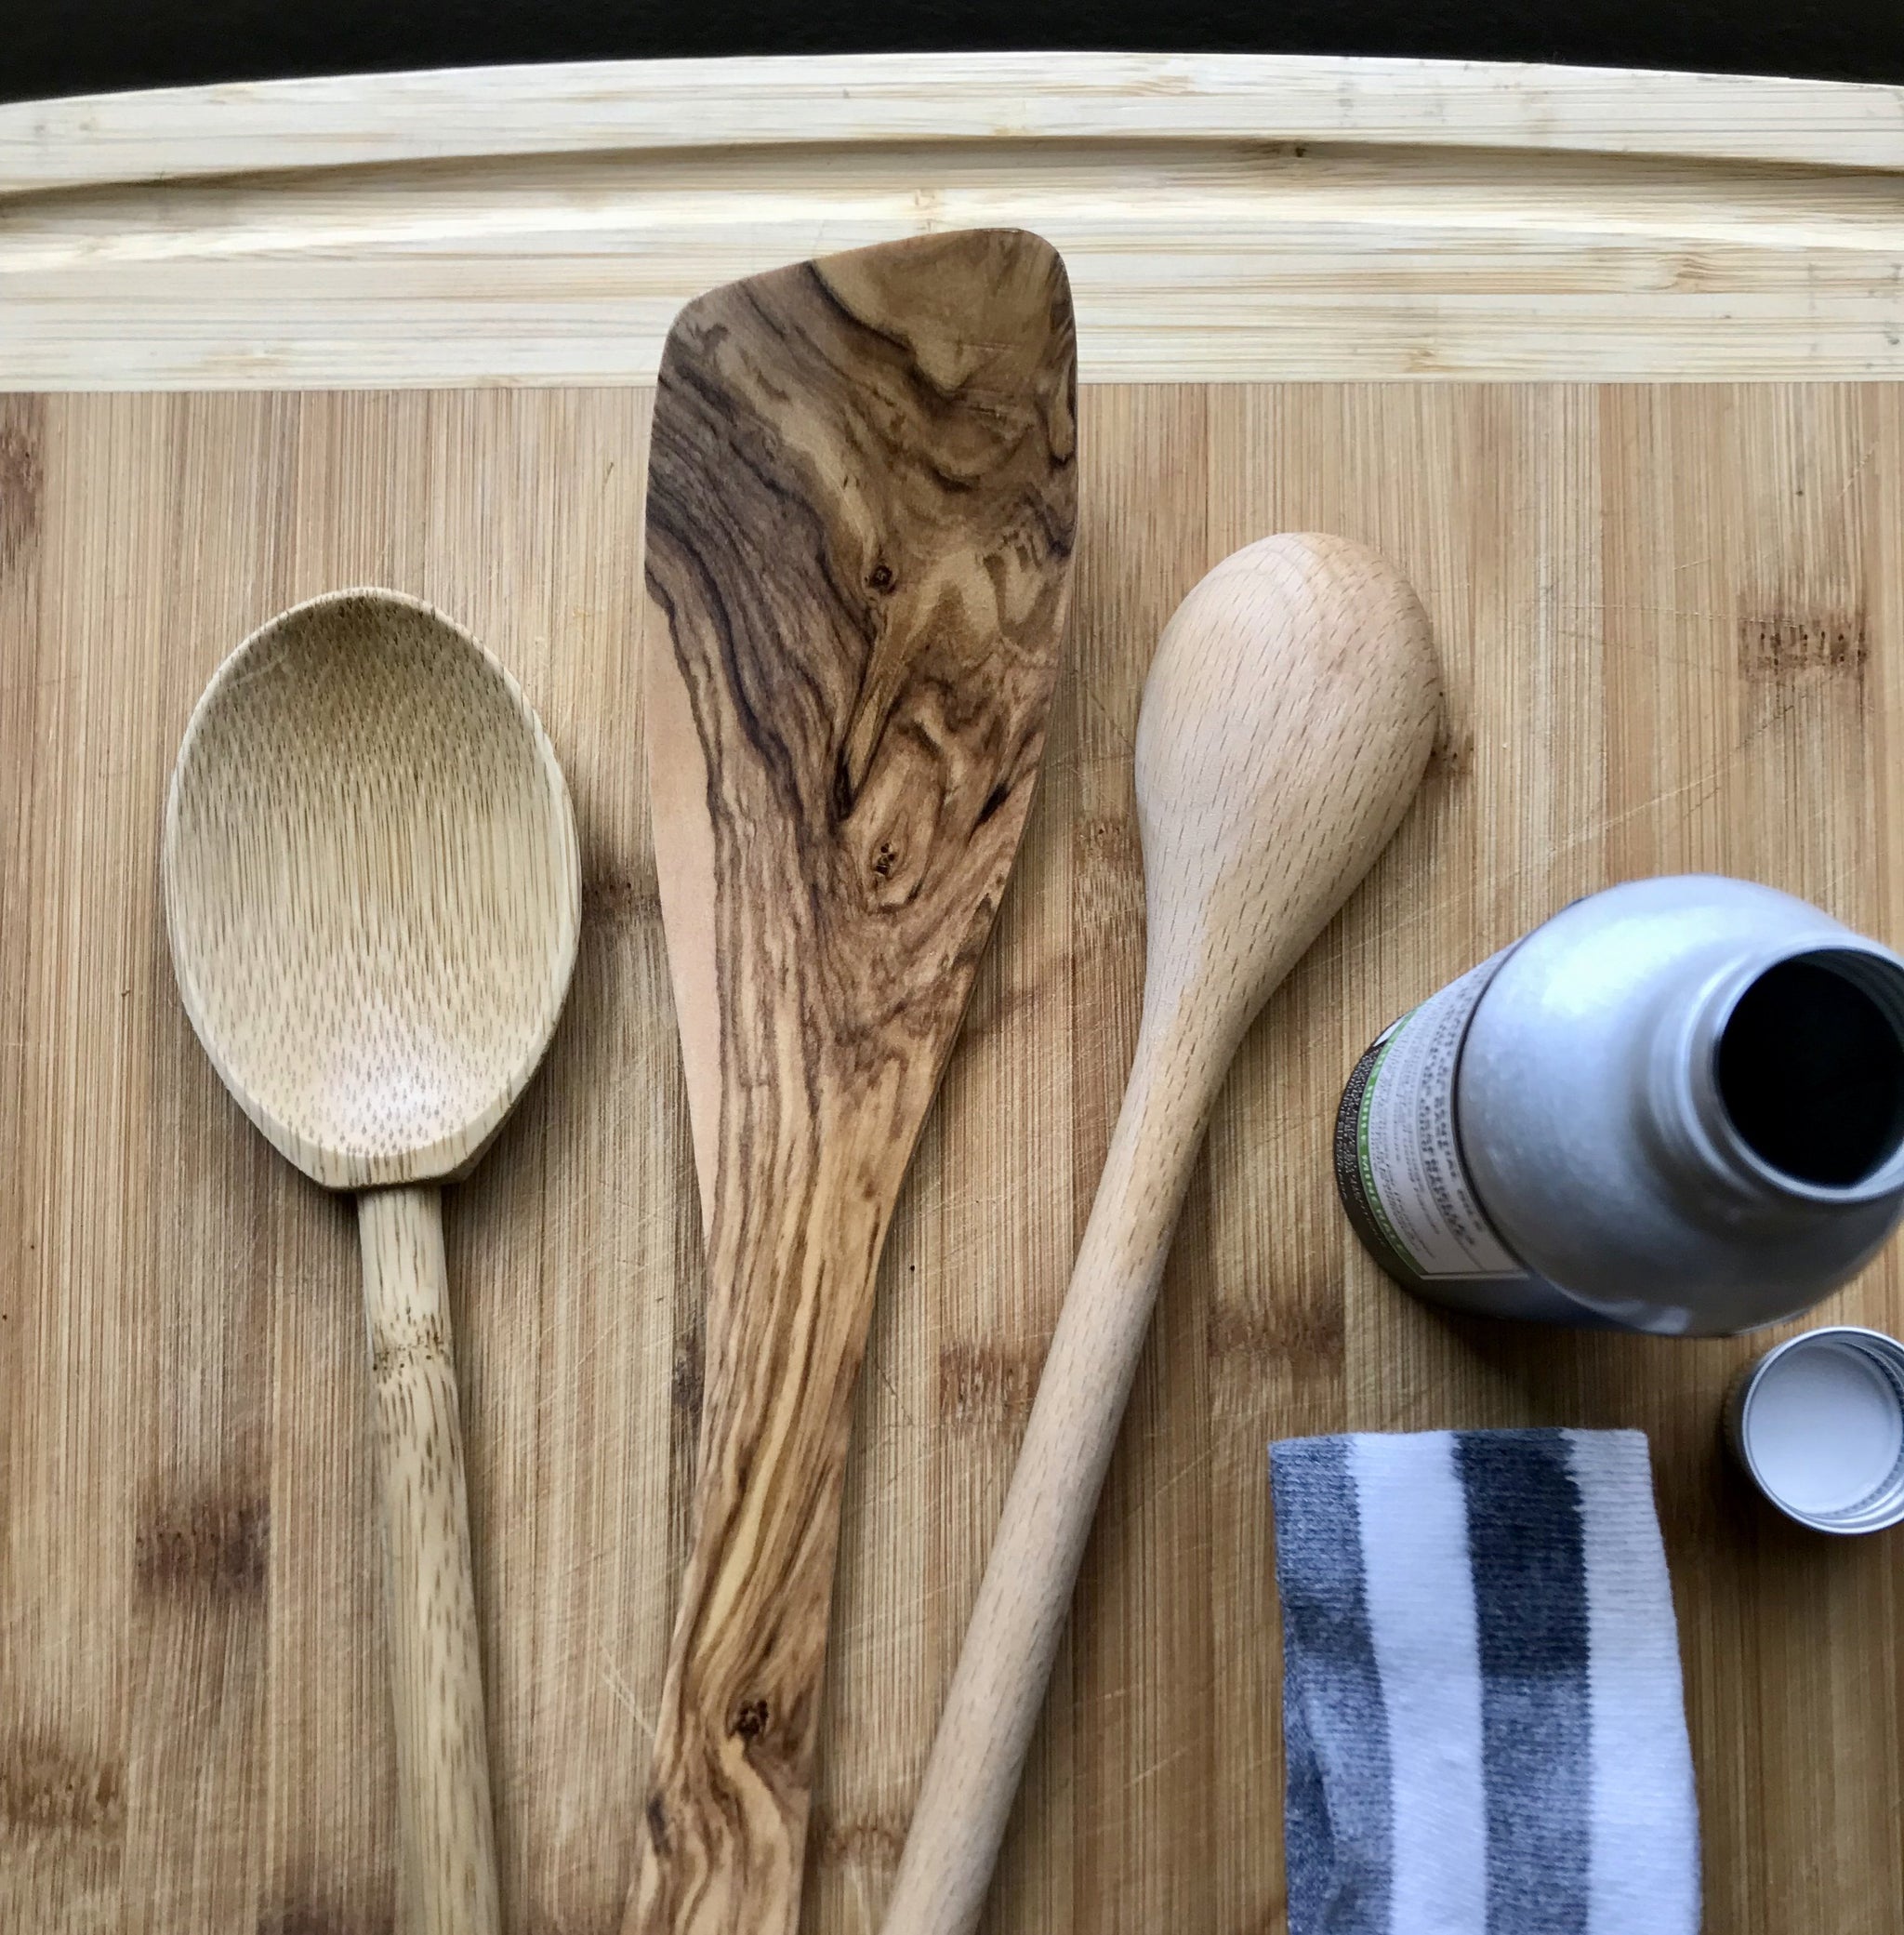 Are you neglecting your wooden cutting boards, spoons and other